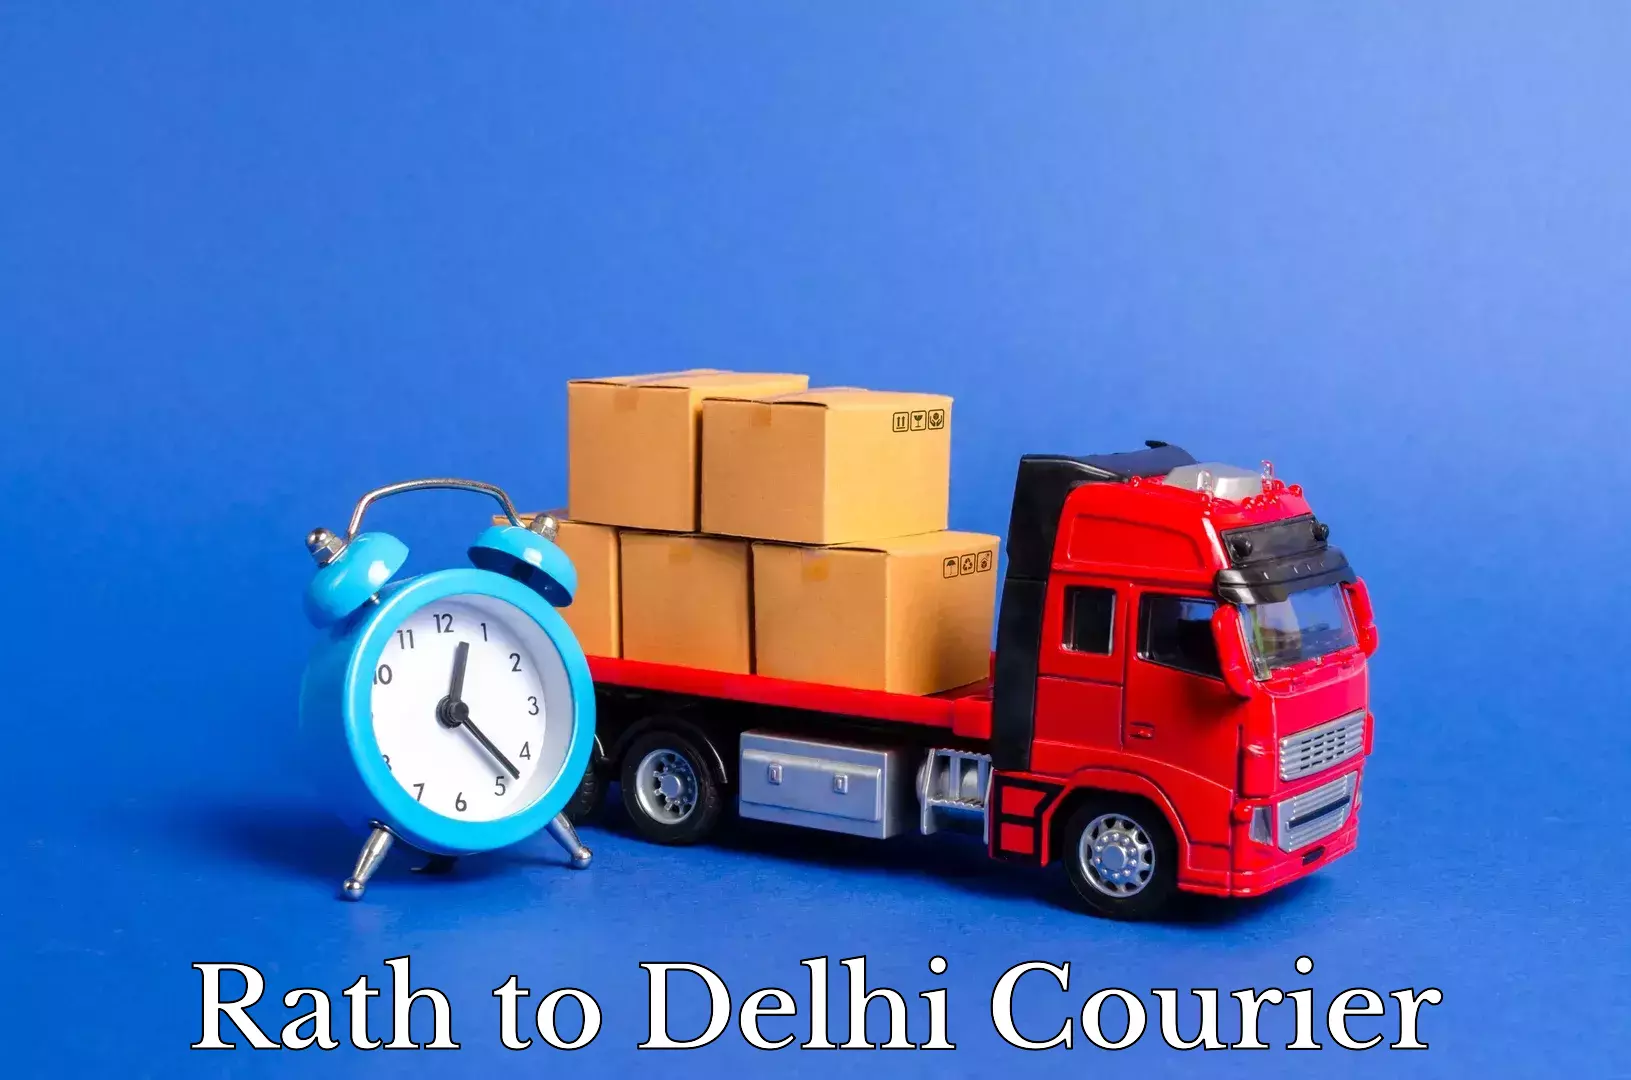 Specialized moving company Rath to Delhi